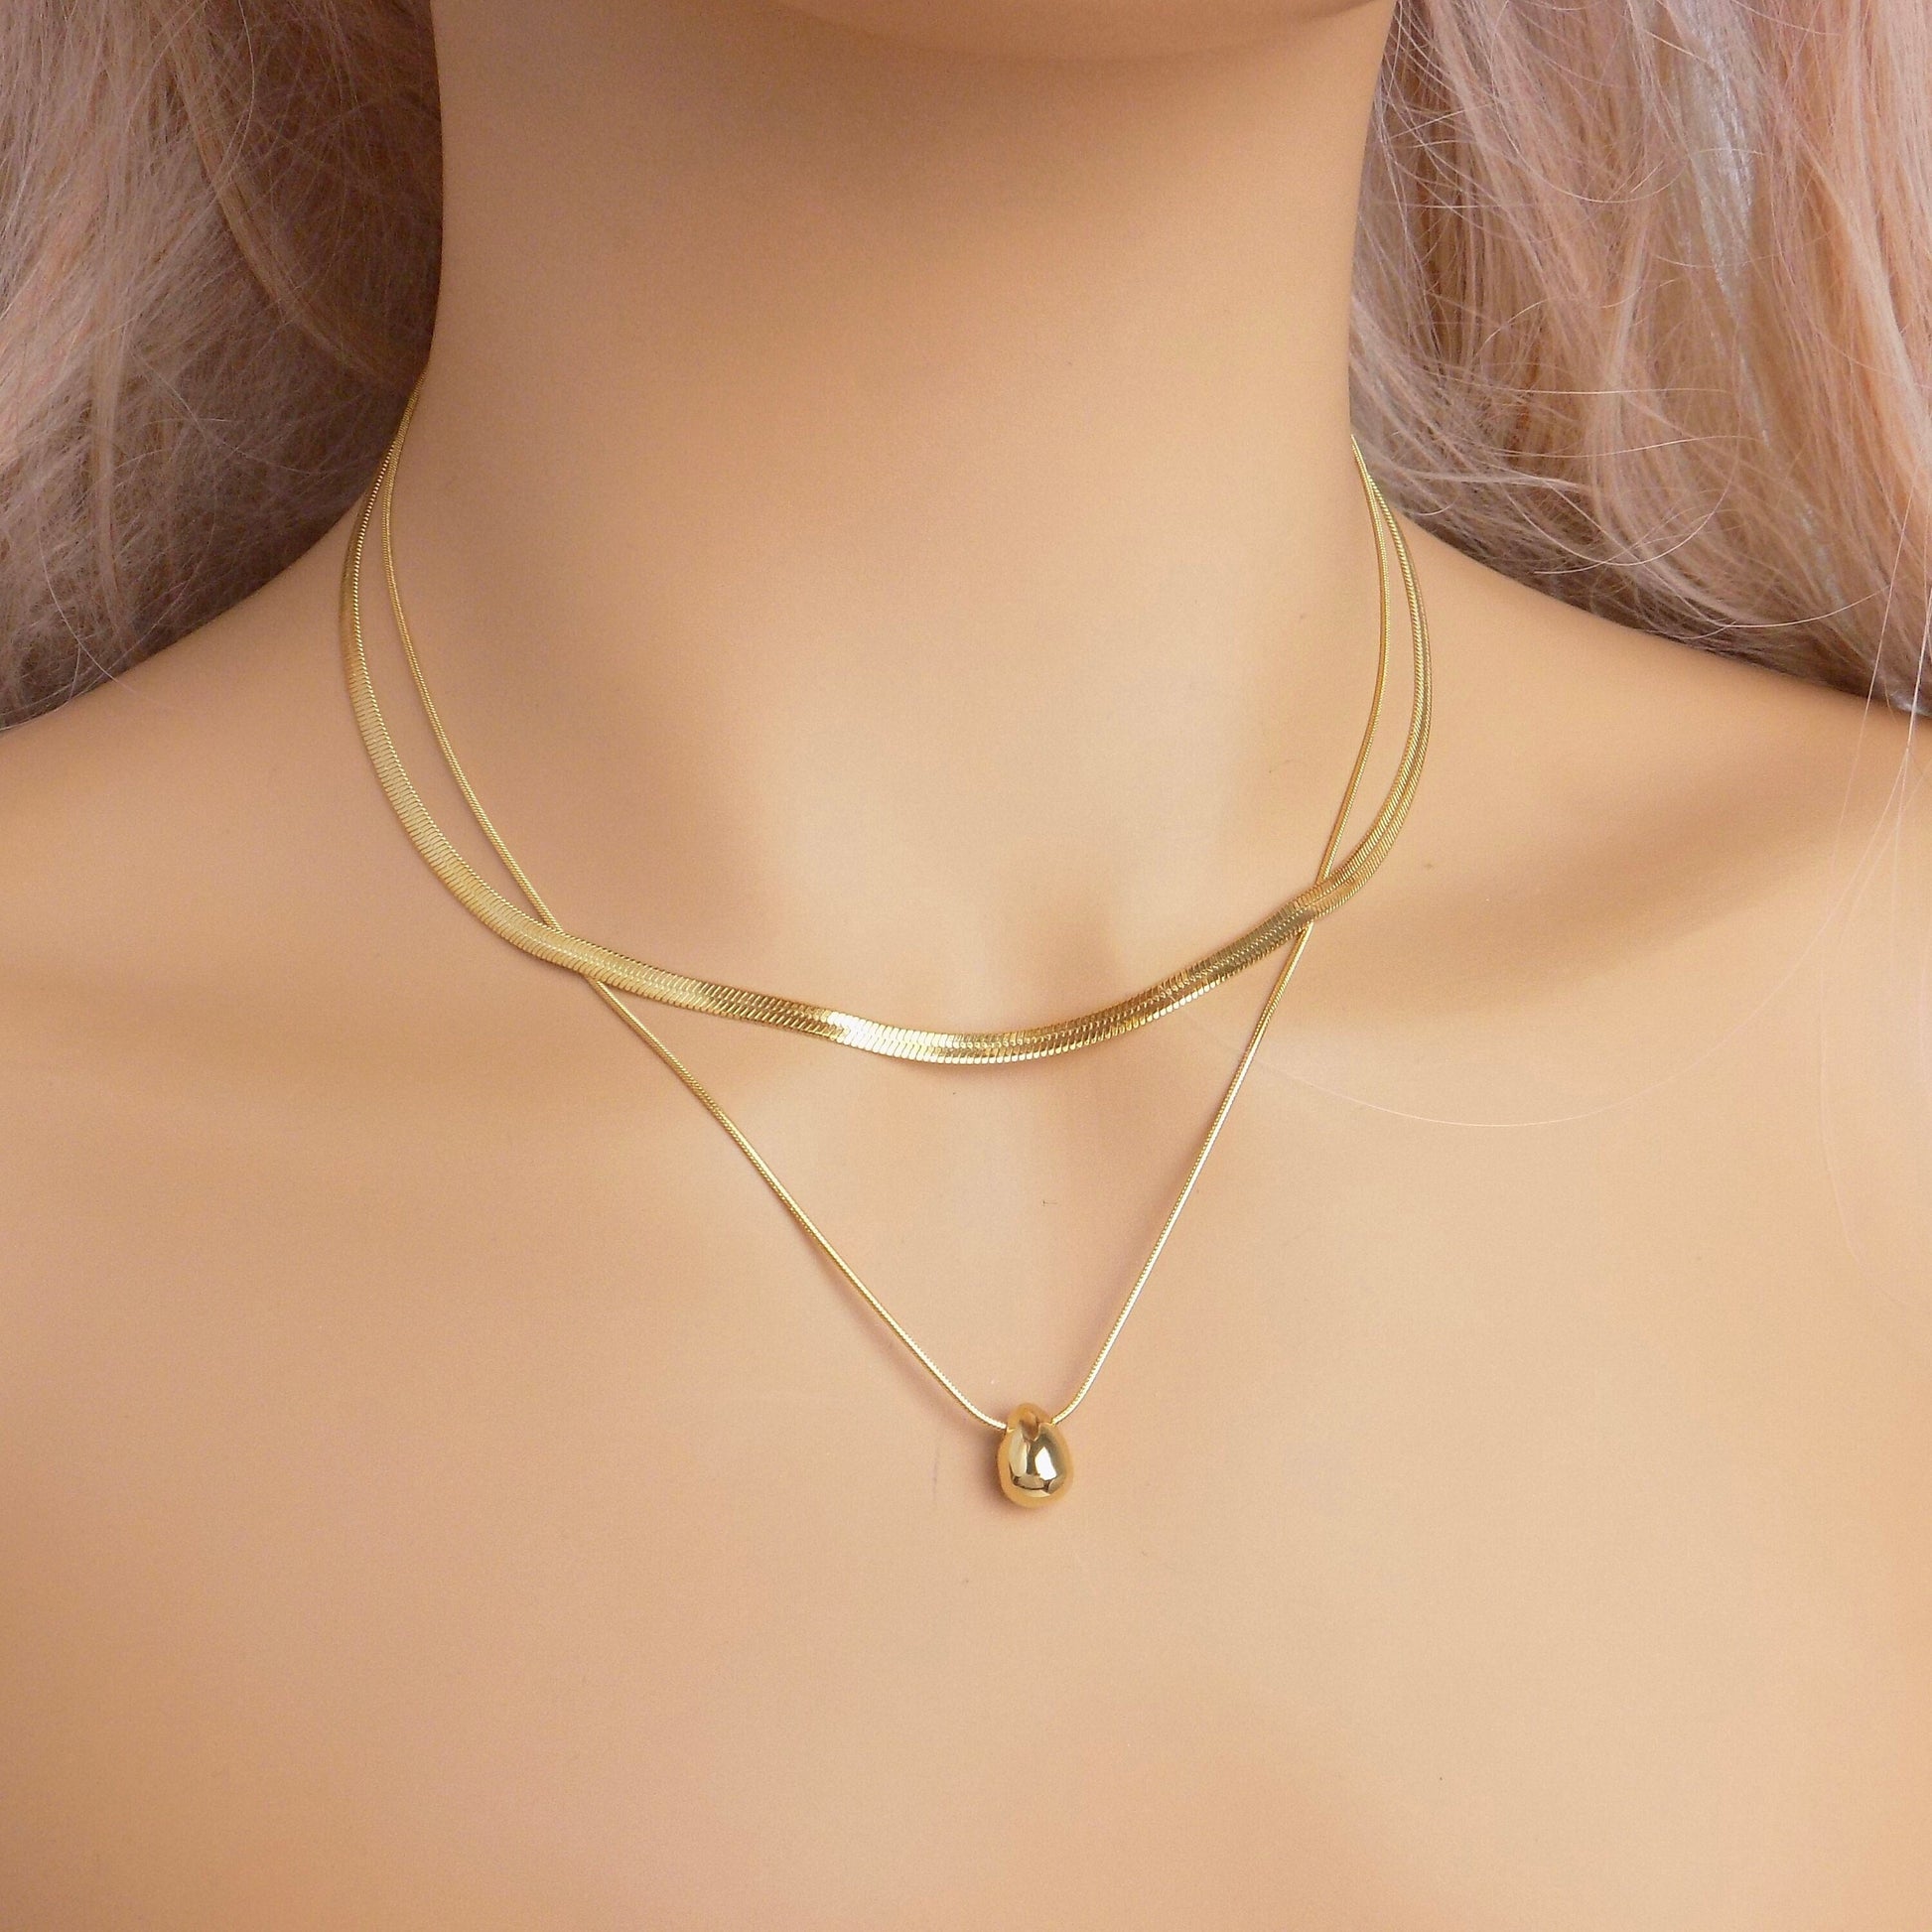 Unique Gold Layered Necklace Set For Women, Snake Chain, Teardrop Charm, 18K Gold Stainless Steel, Modern Trendy, M7-119